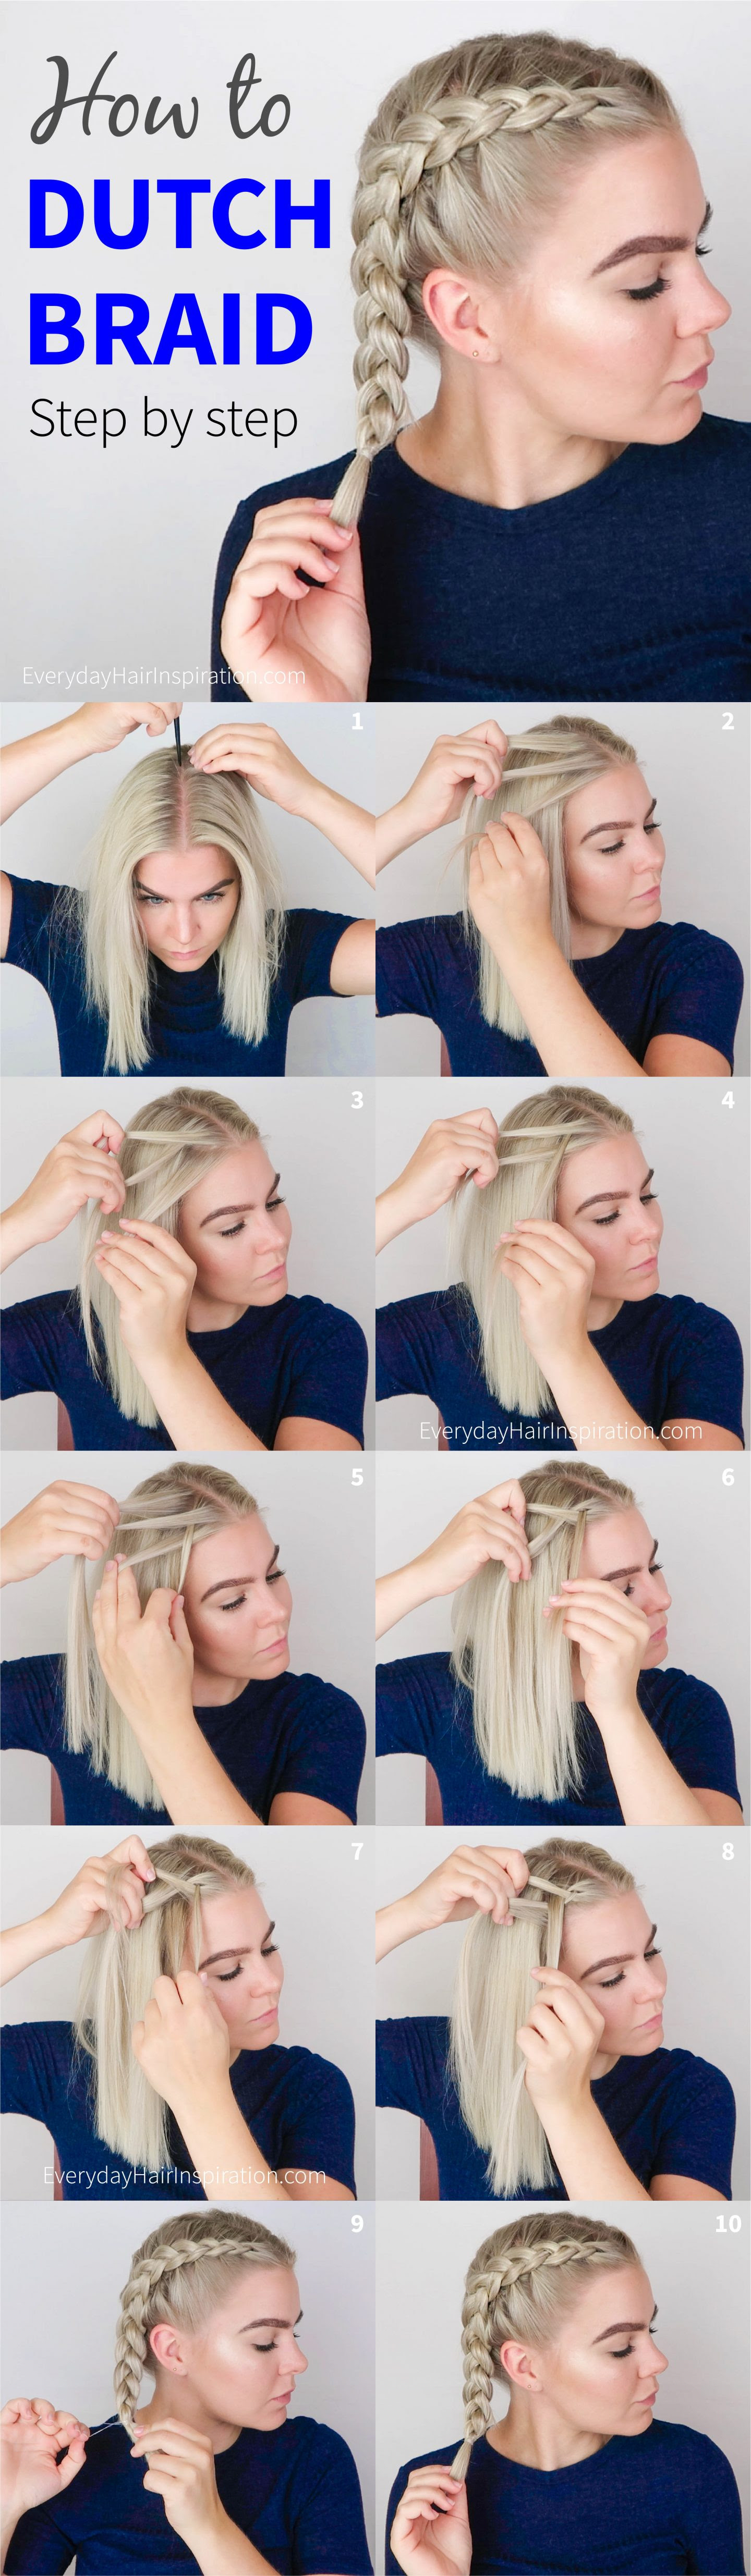 How To Wiki 89 How To Dutch Braid Hair Step By Step